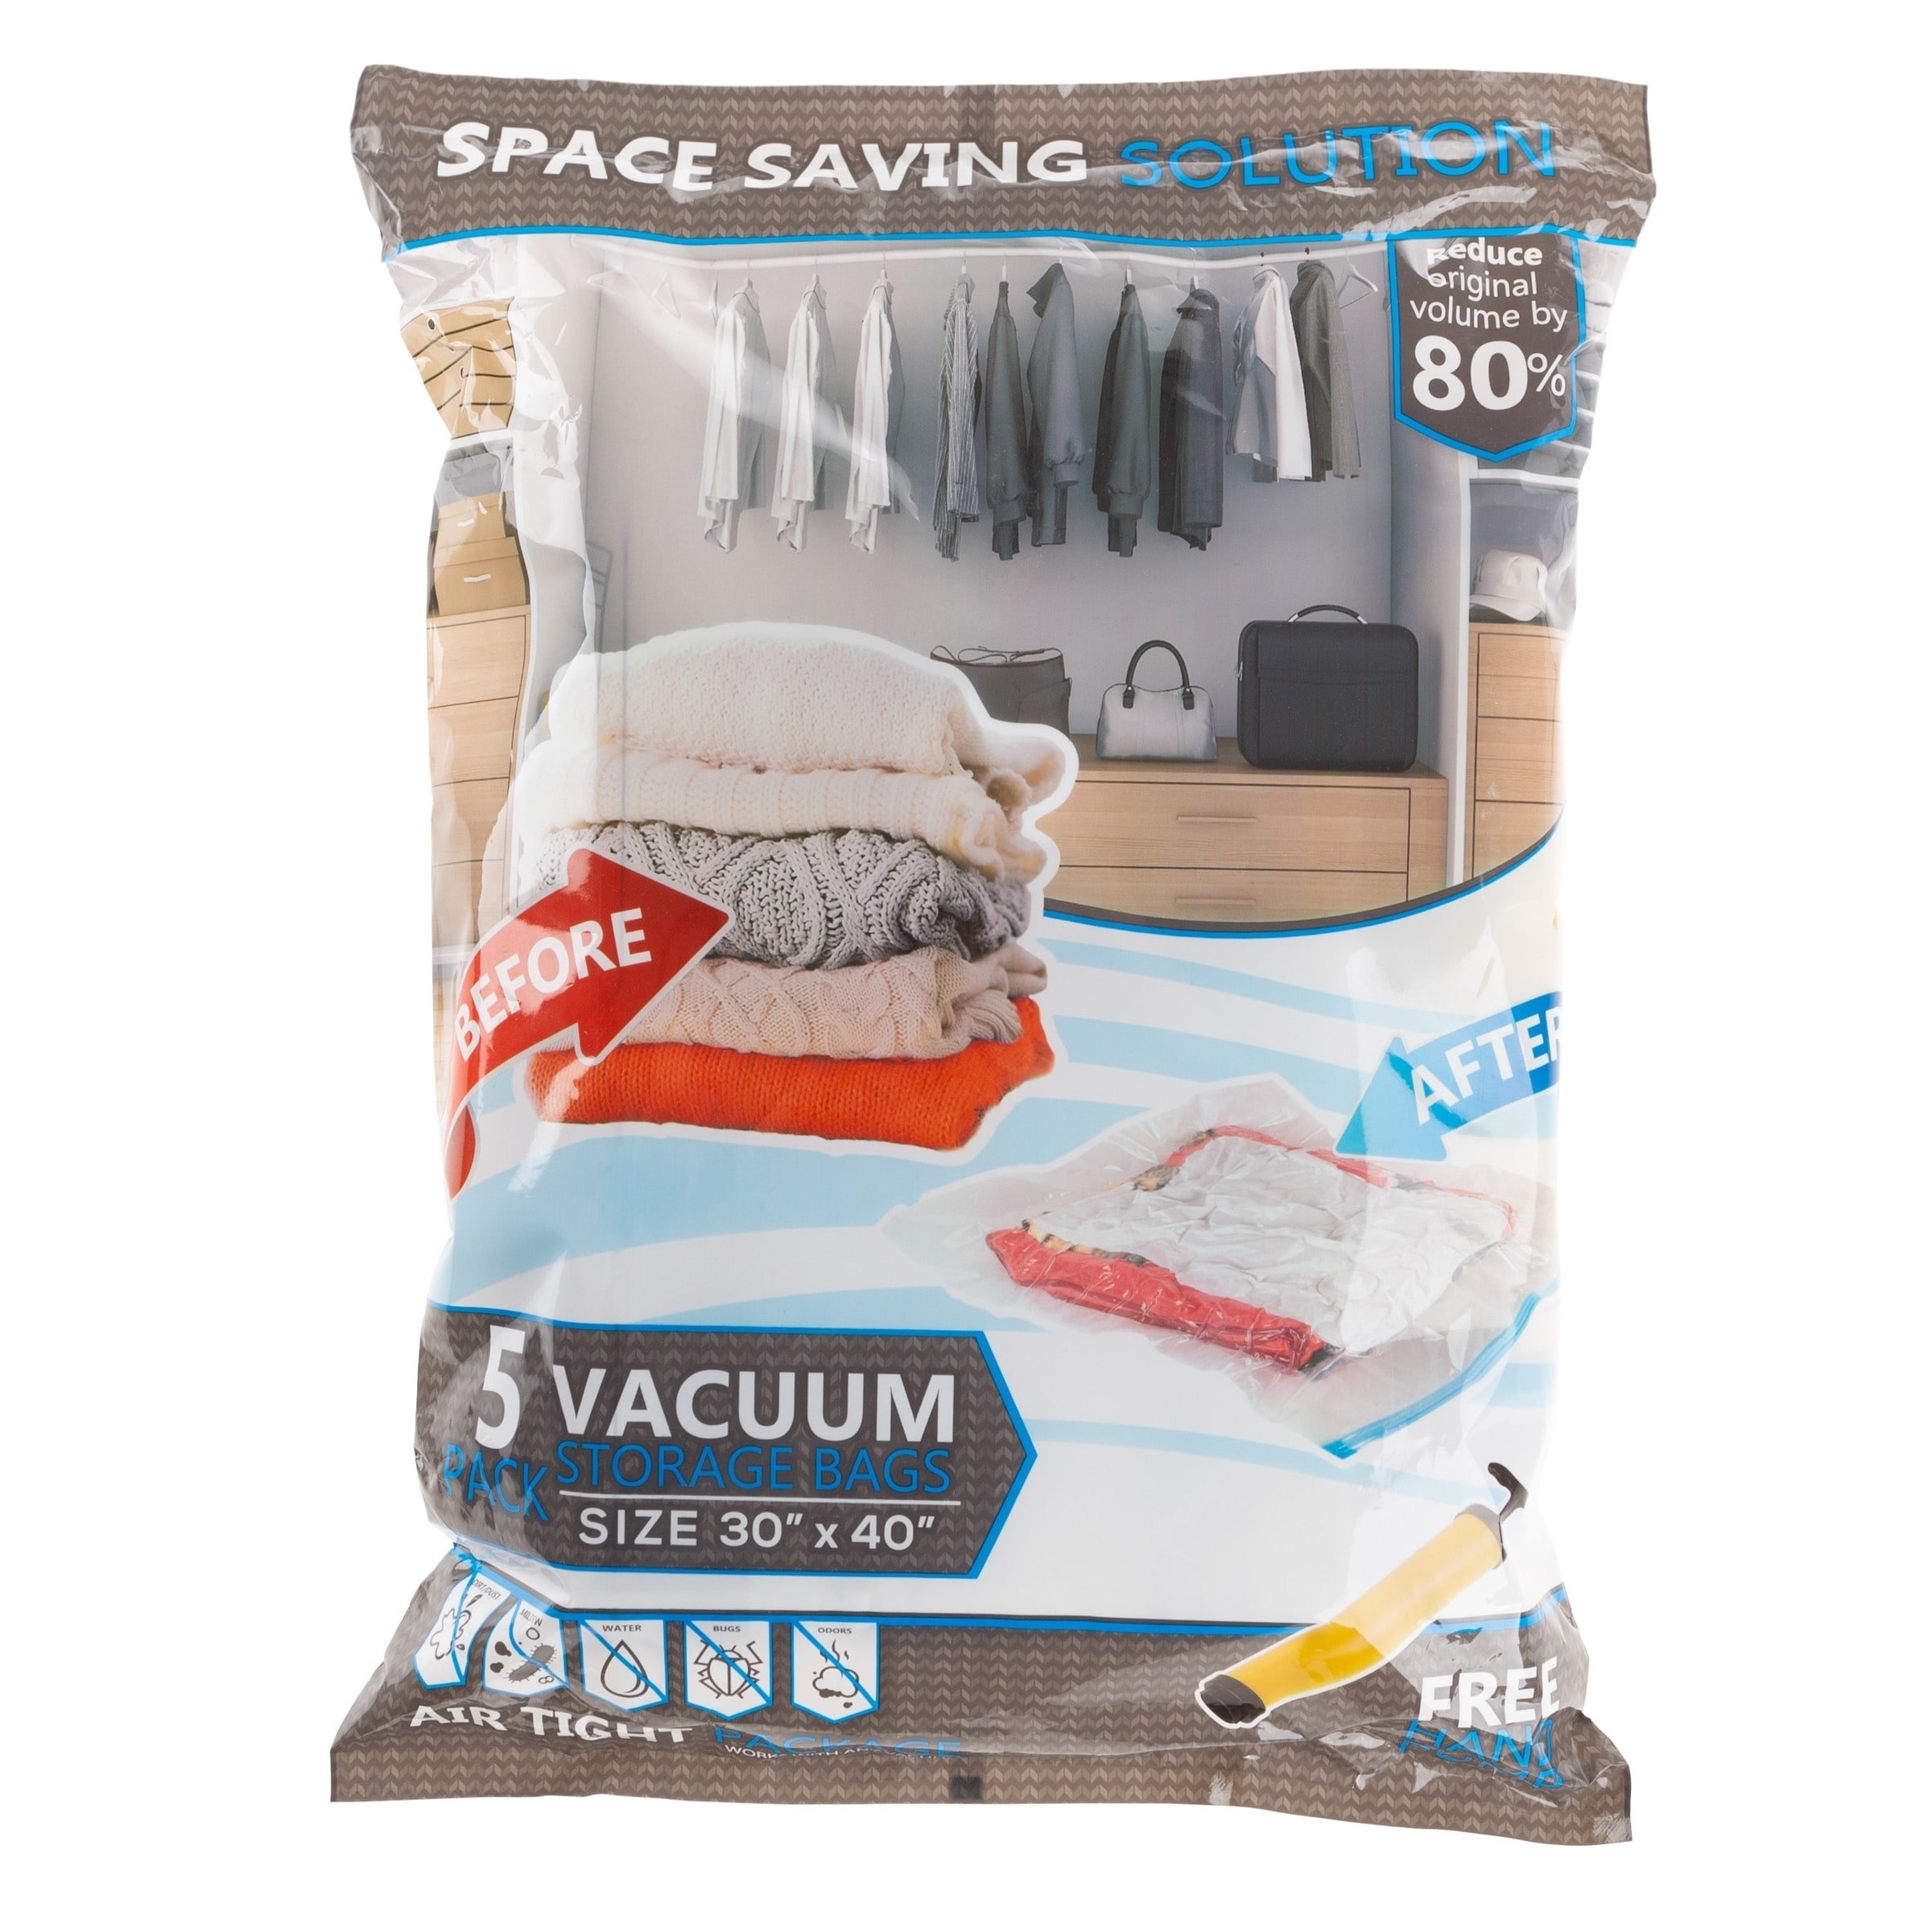 https://ak1.ostkcdn.com/images/products/27775493/5-Vacuum-Storage-Bags-Space-Saving-Air-Tight-Compression-Shrink-Closet-Clutter-Store-Organize-Clothes-Linens-by-Lavish-Home-3ebafbad-886e-42ca-8c17-931d24b5a850.jpg